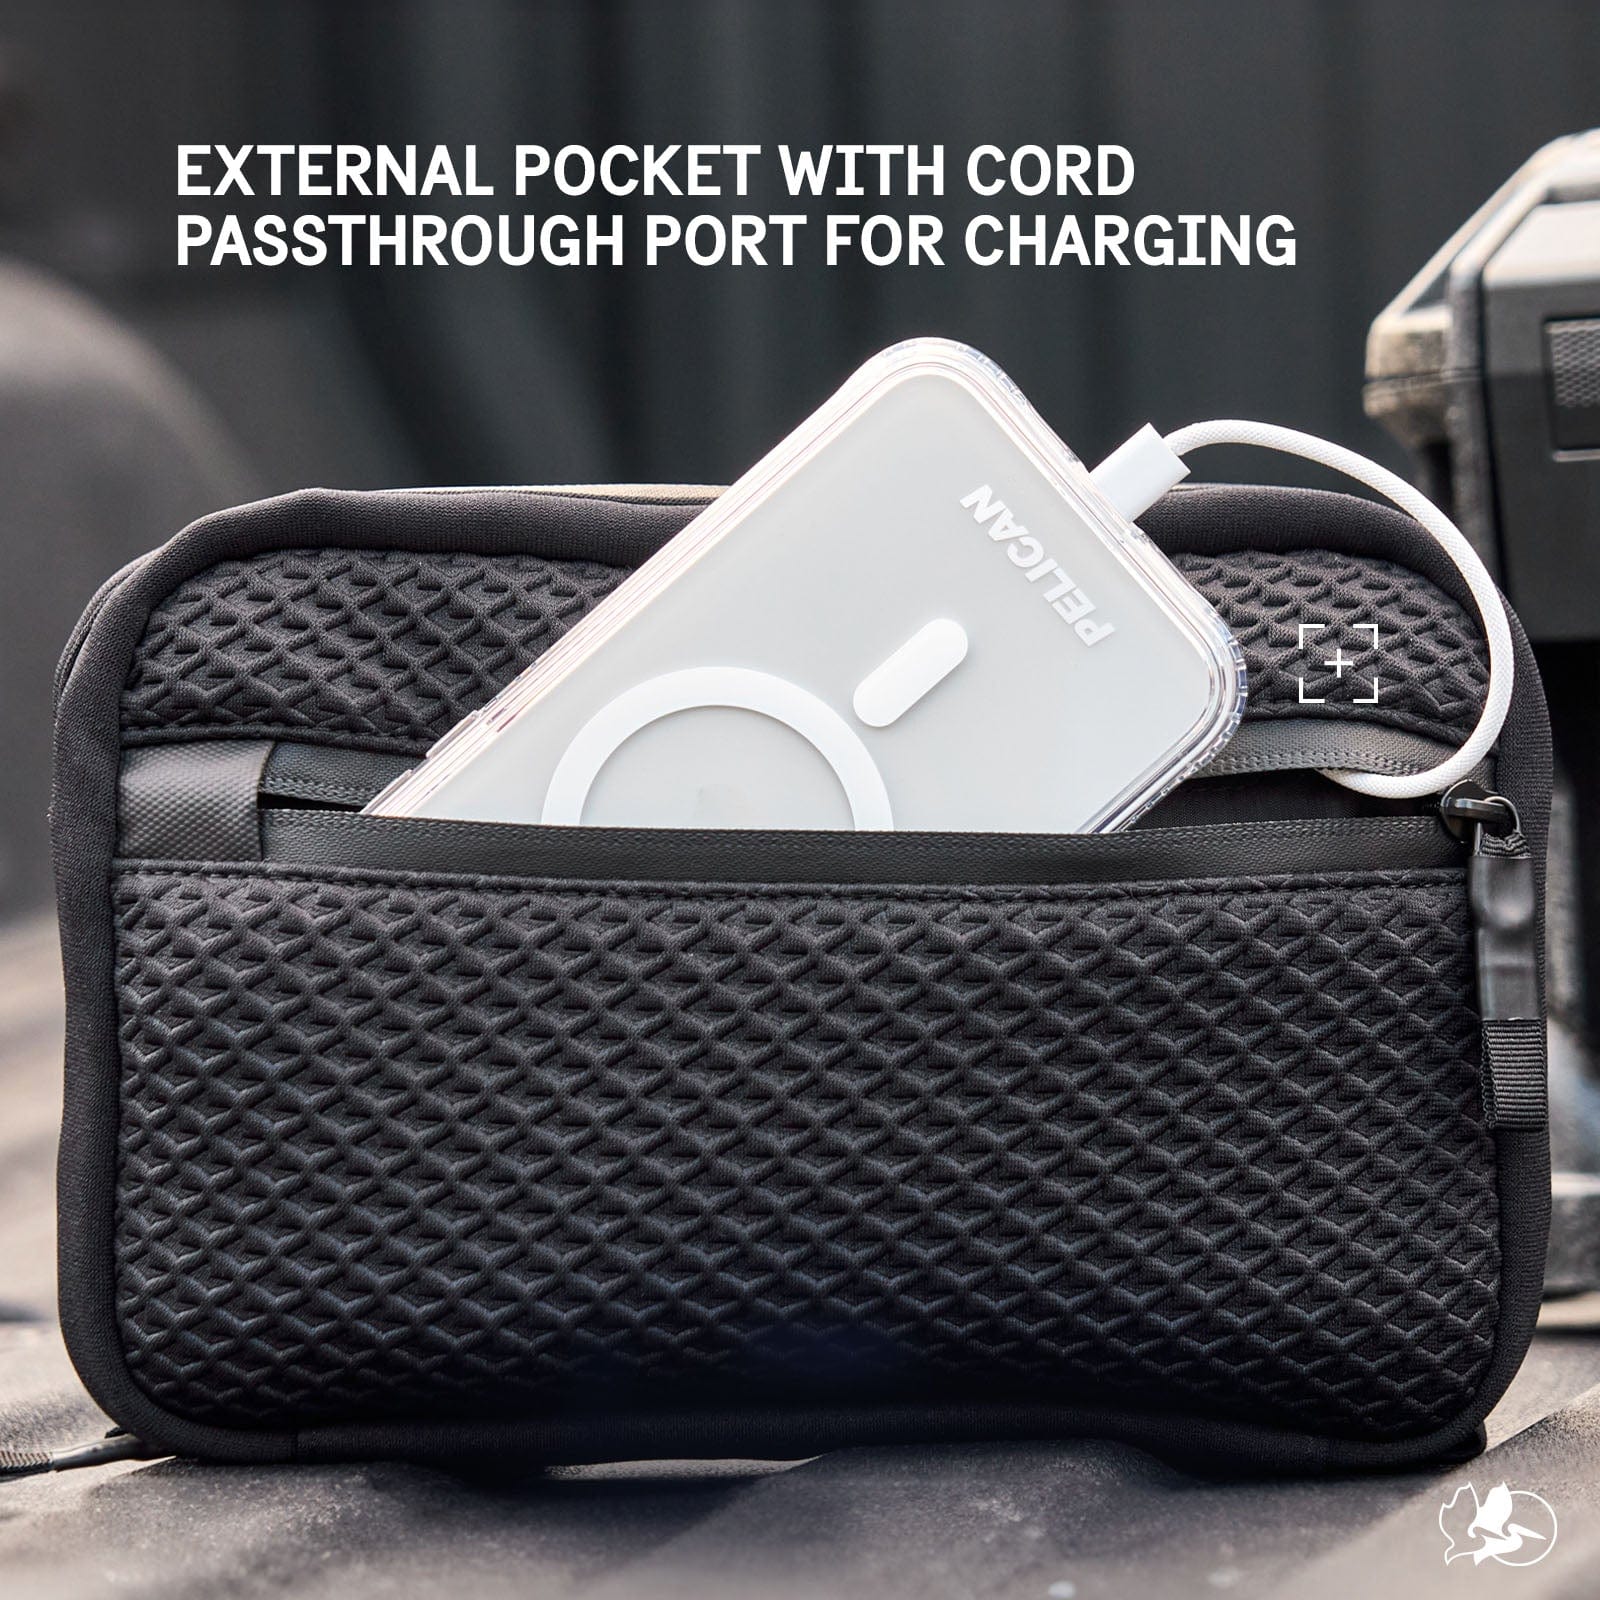 EXTERNAL POCKET WITH CORD PASSTHROUGH FOR CHARGING